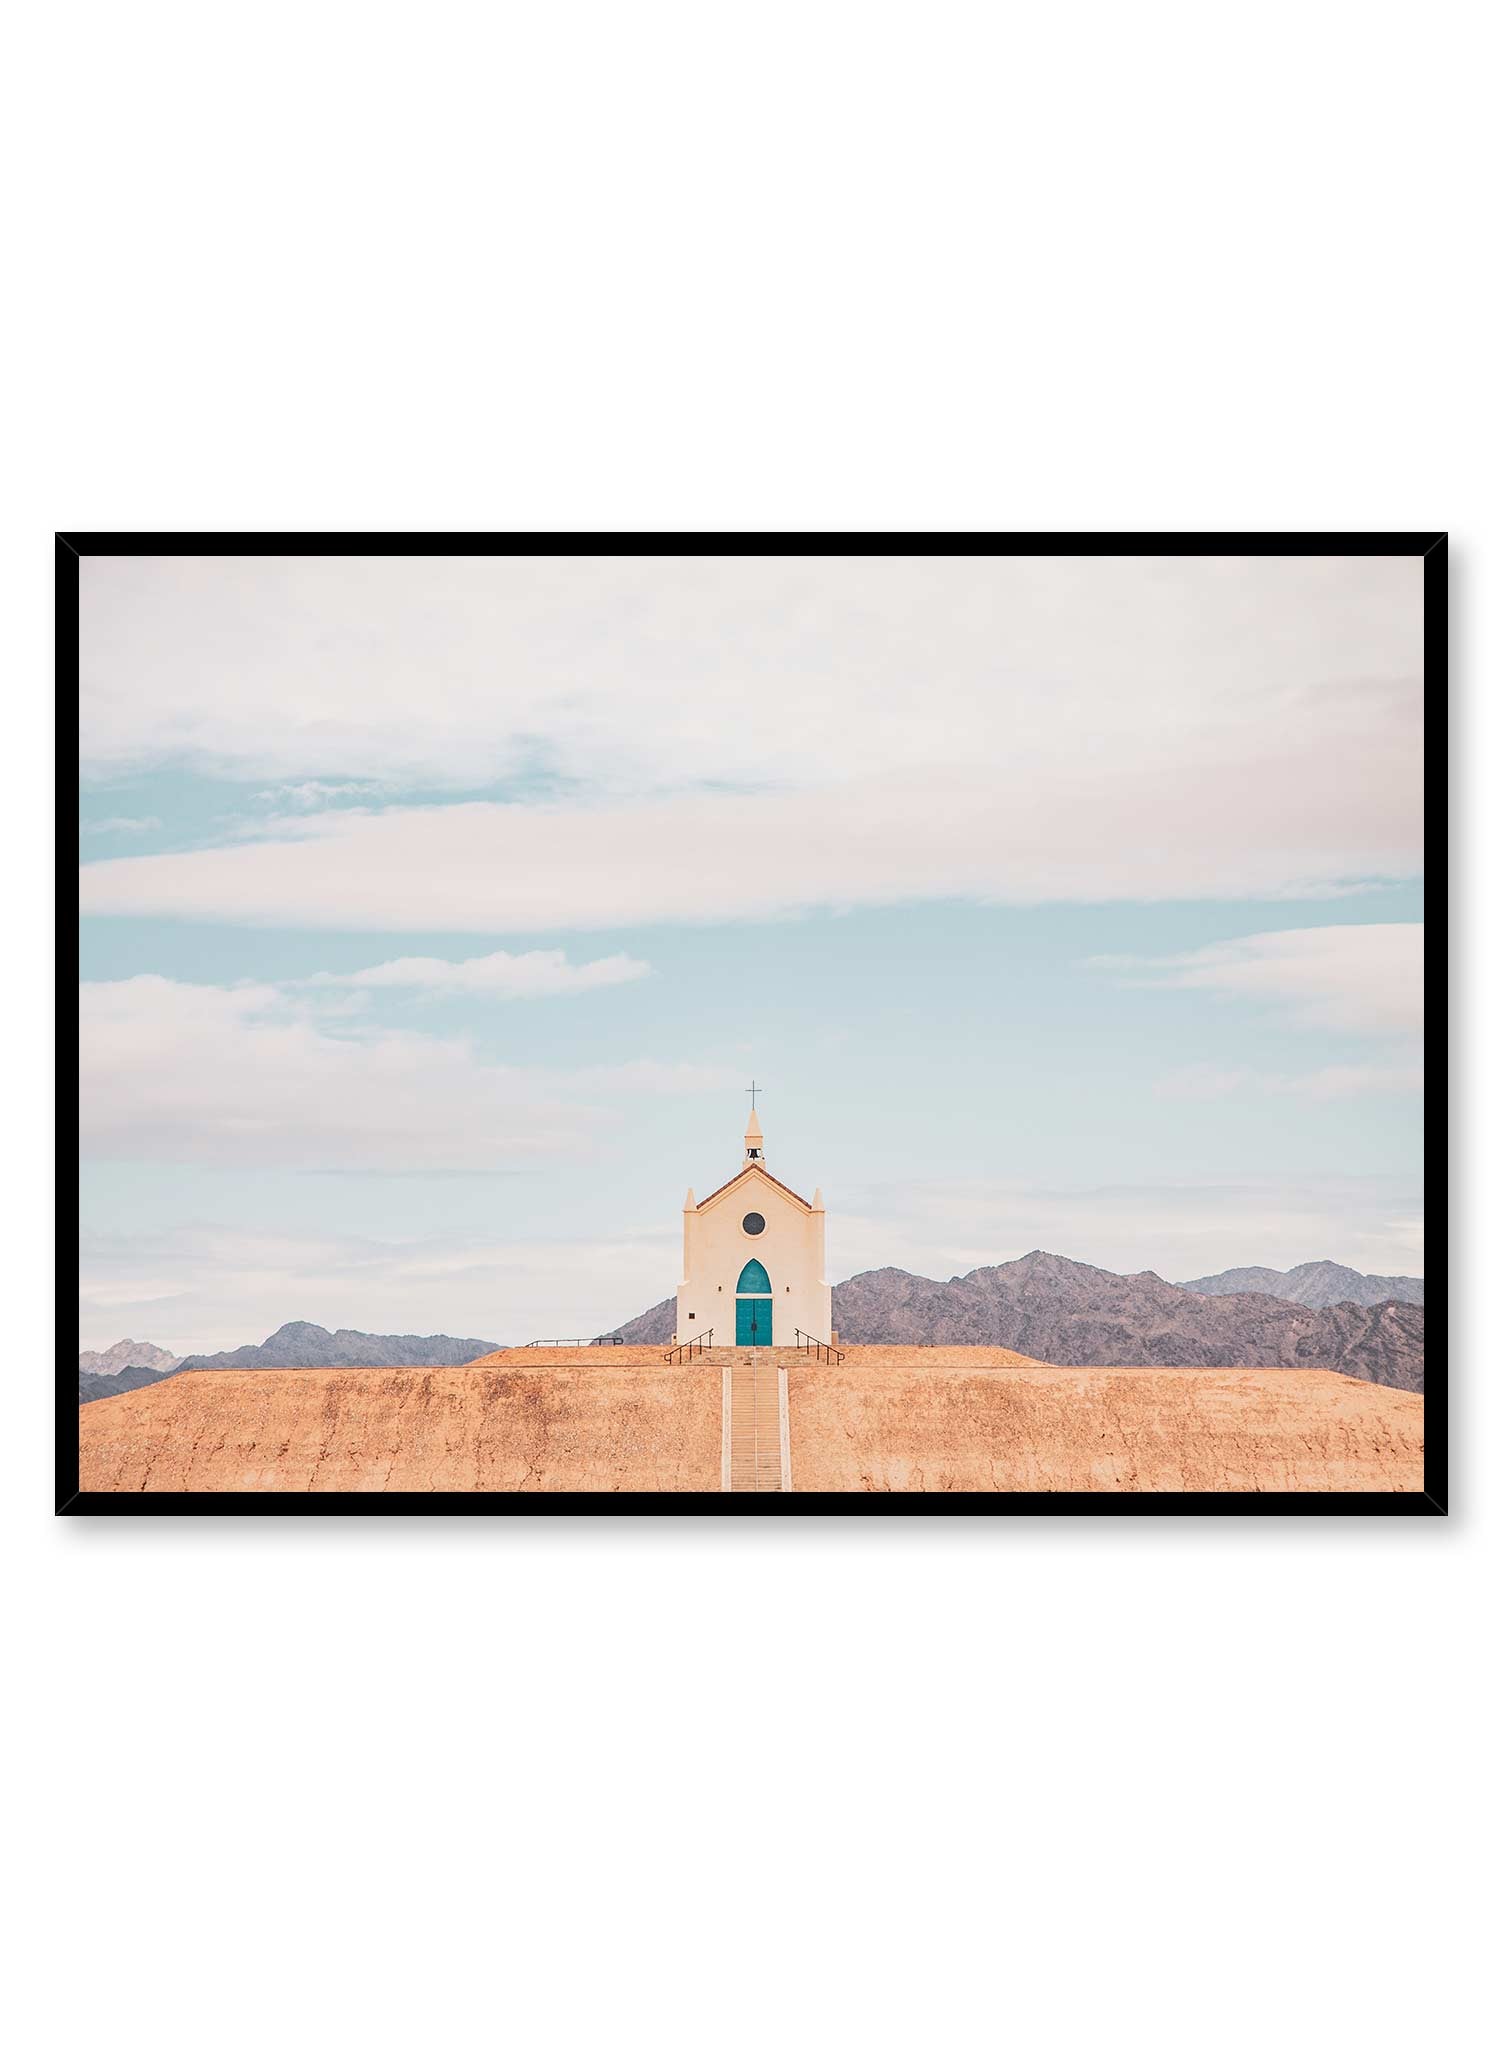 Upstairs is a photography poster of a quaint rustic chapel by Opposite Wall.